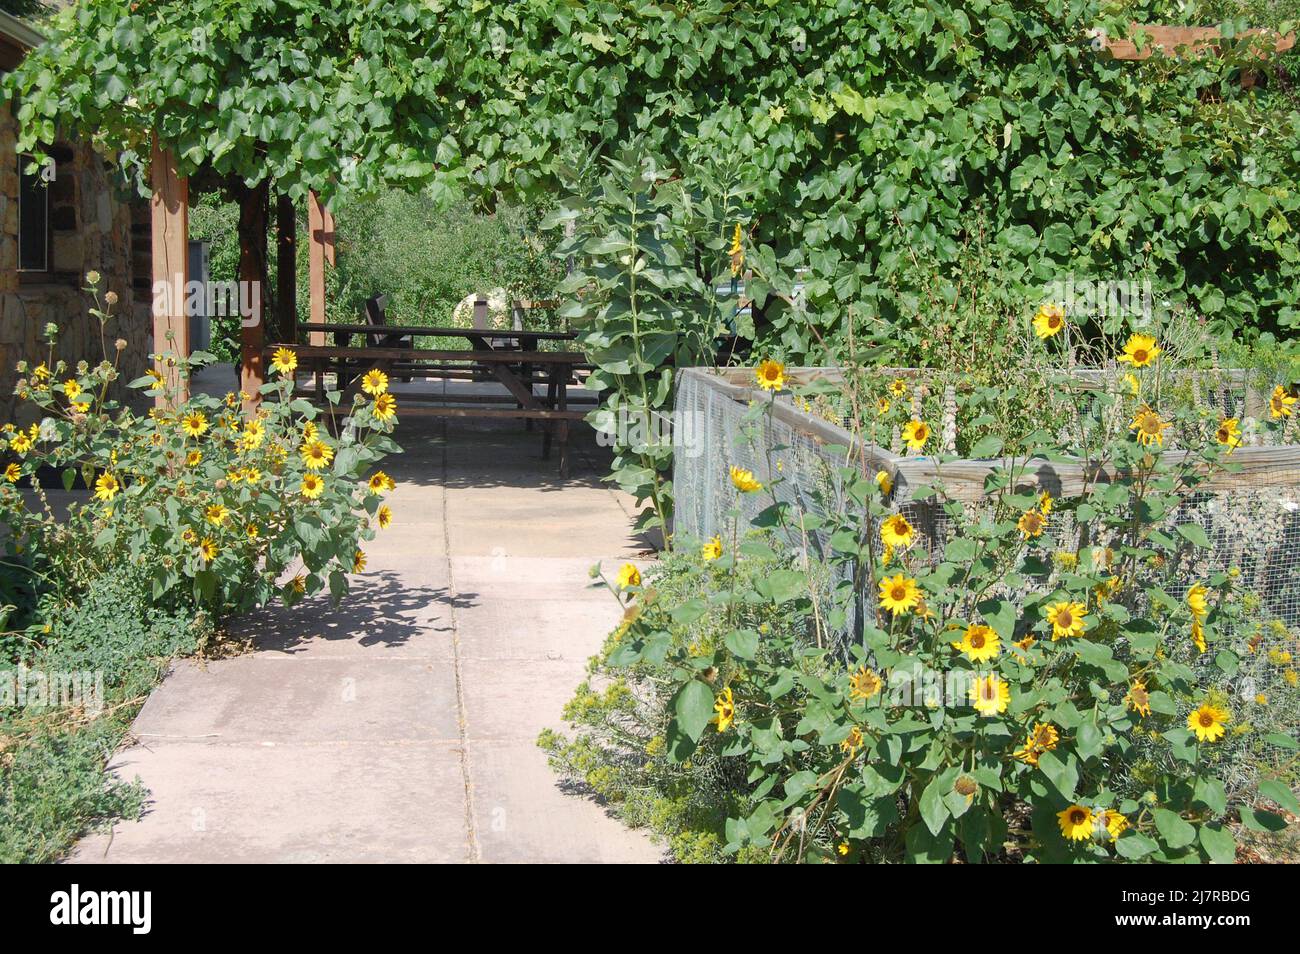 Wild overgrown garden with yellow daisies and sidewalk and leaves Stock Photo